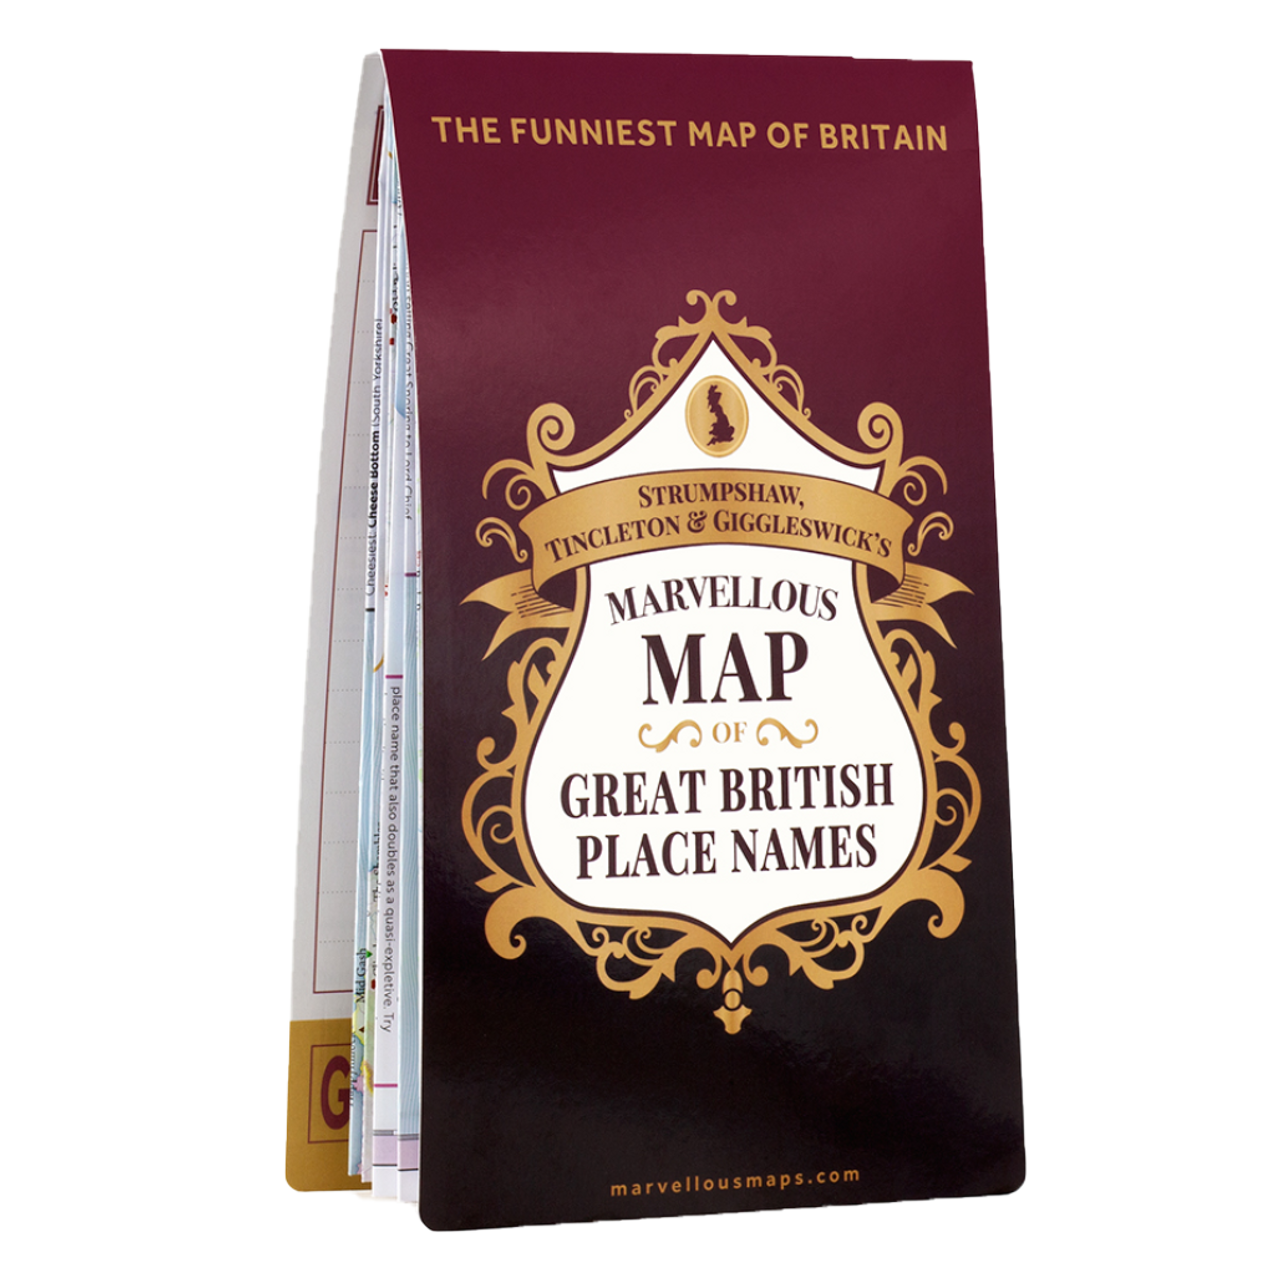 St&gs Marvellous Map Of Great British Place Names